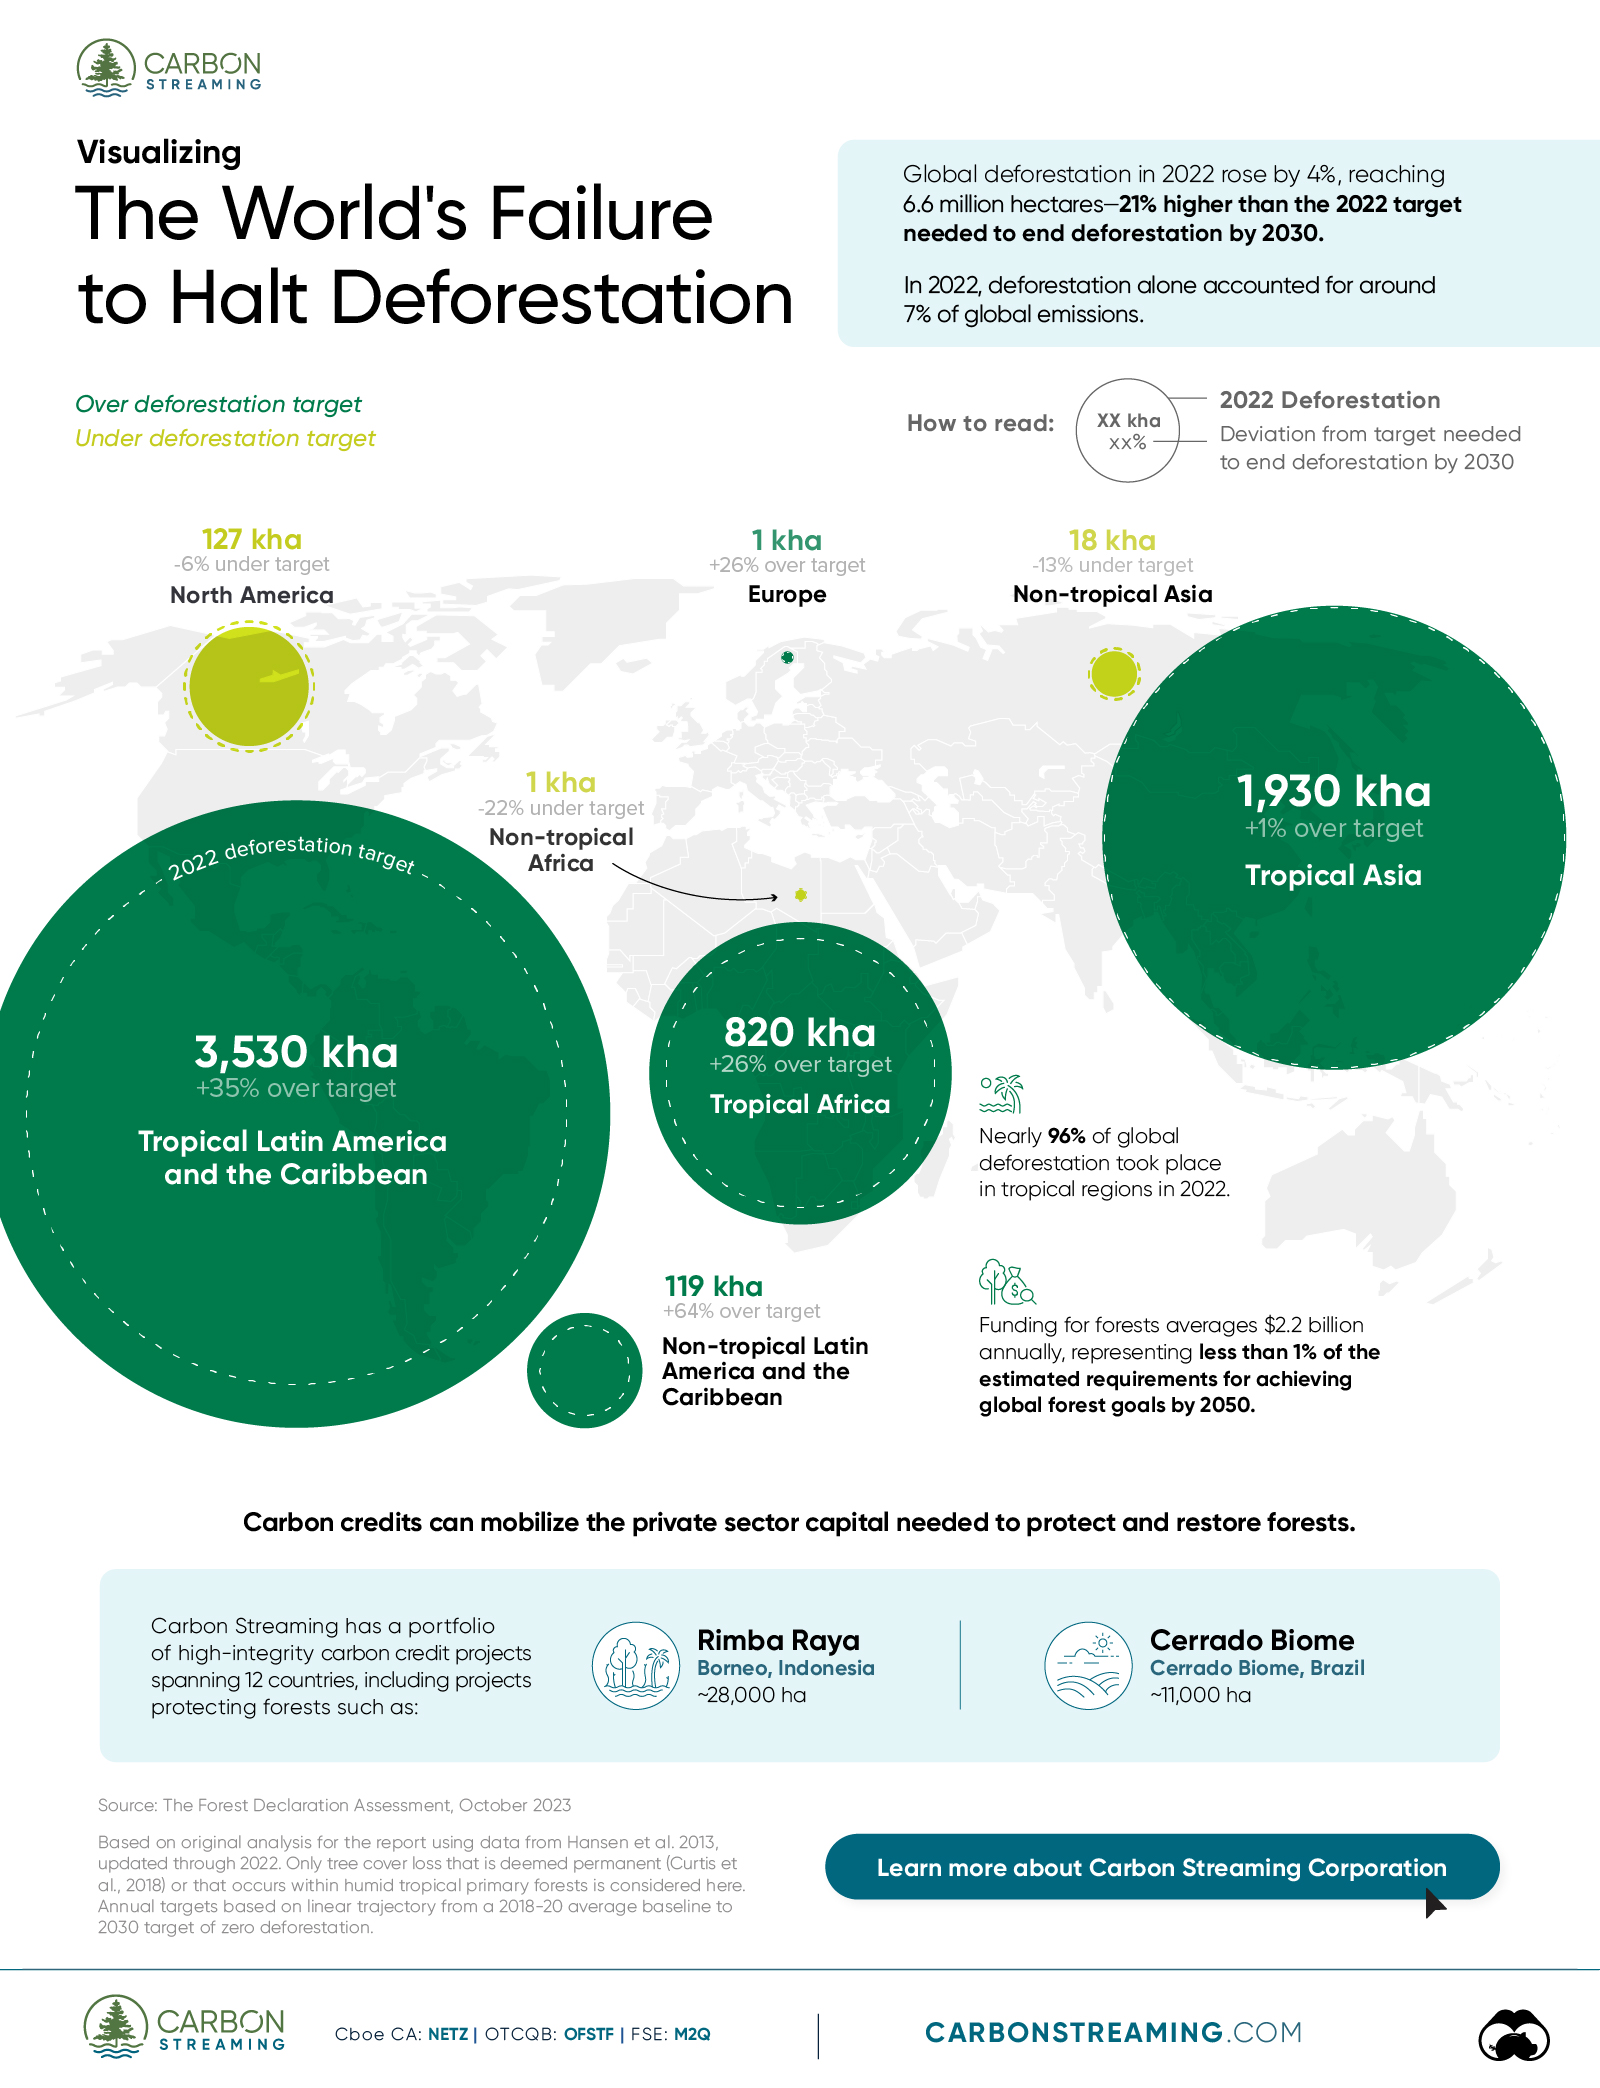 Map Showing How the World Failed to Reduce Deforestation in Certain Regions Around the Globe, Primarily in Tropical Regions.